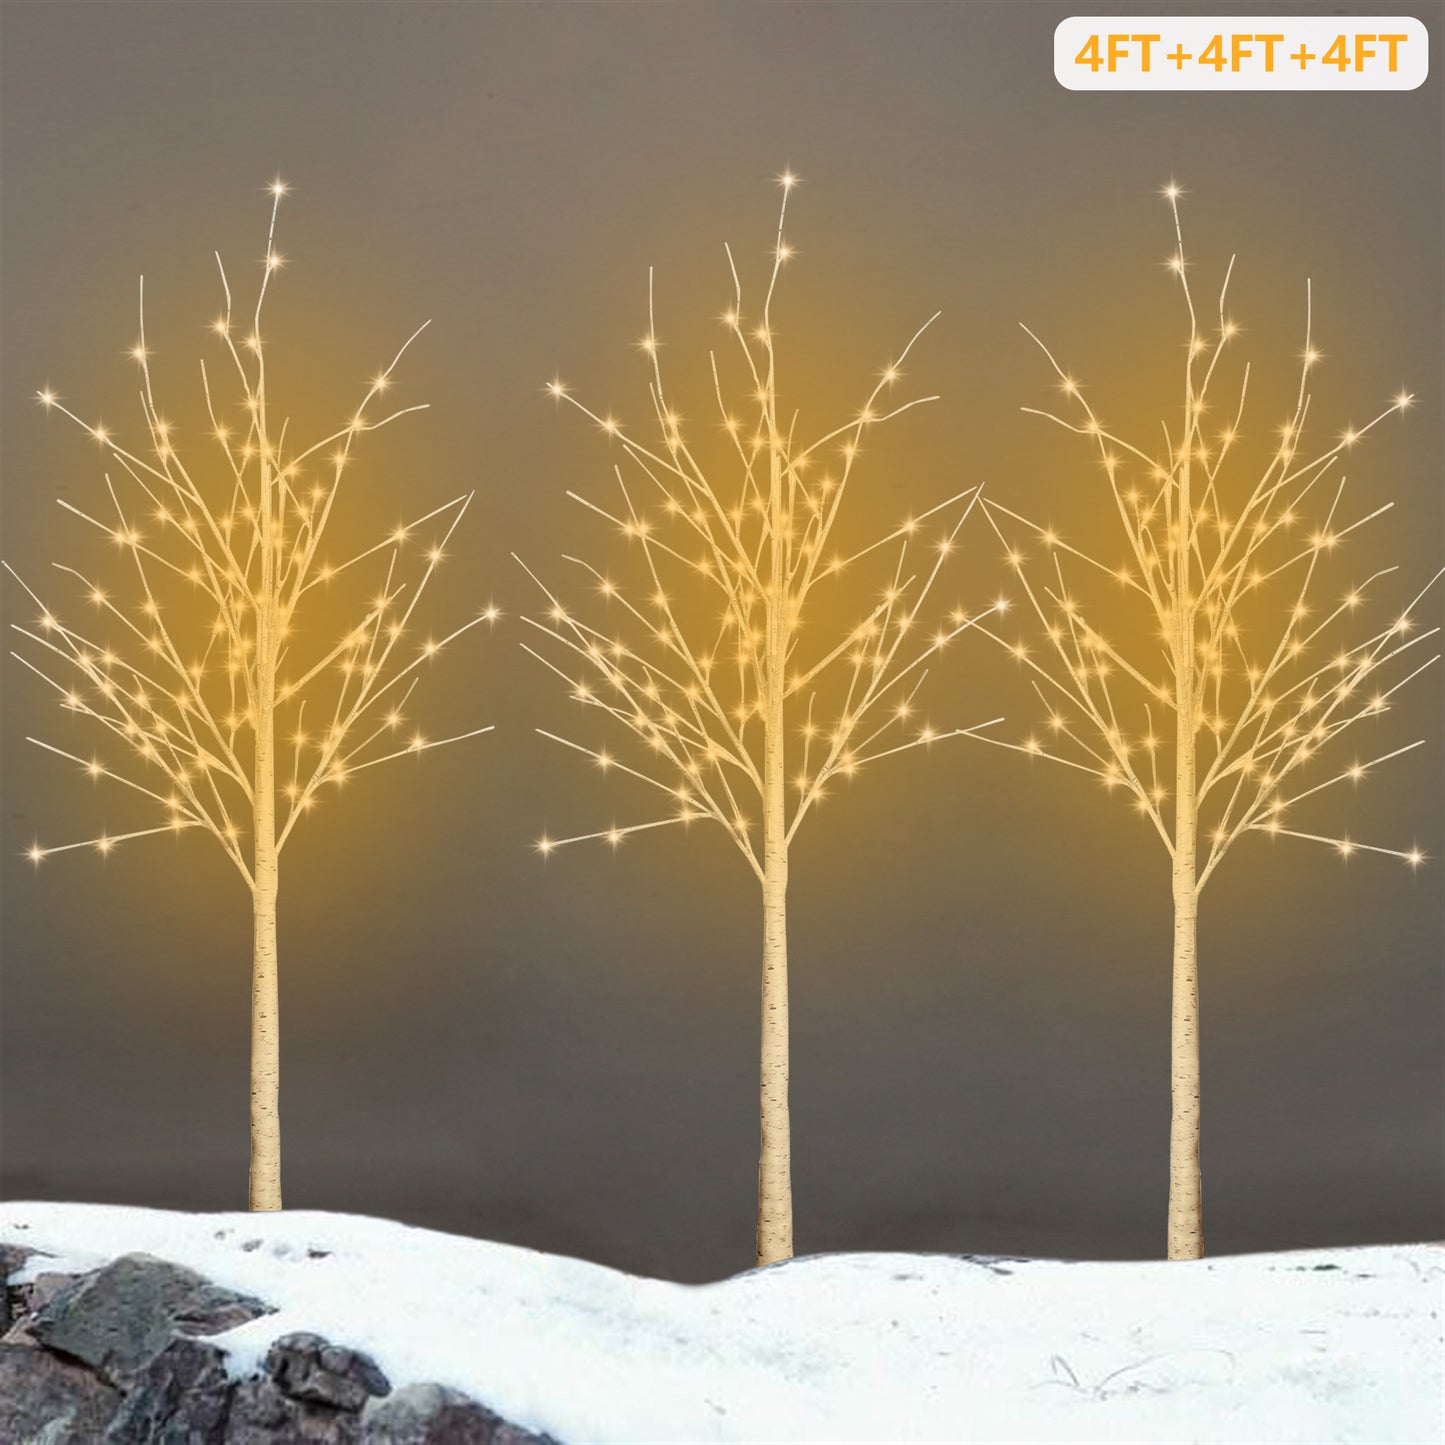 4ft White Birch Tree Set of 3, with LED Lights, for Christmas Decoration, Warm White, D4011